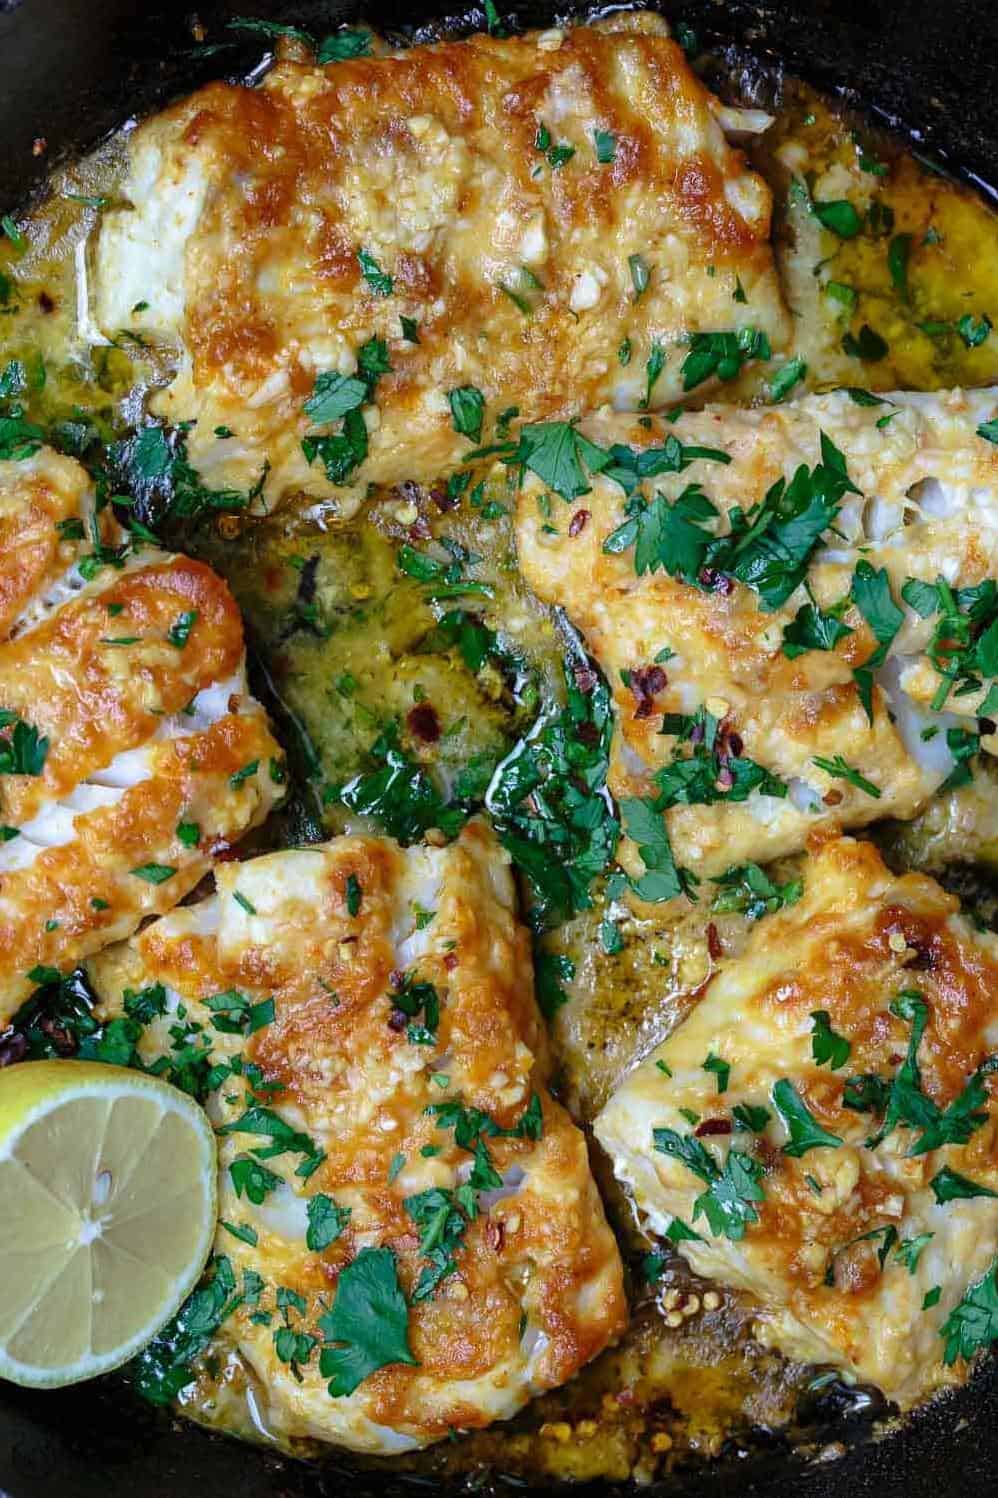  This baked cod is a light and healthy meal option full of omega-3s.